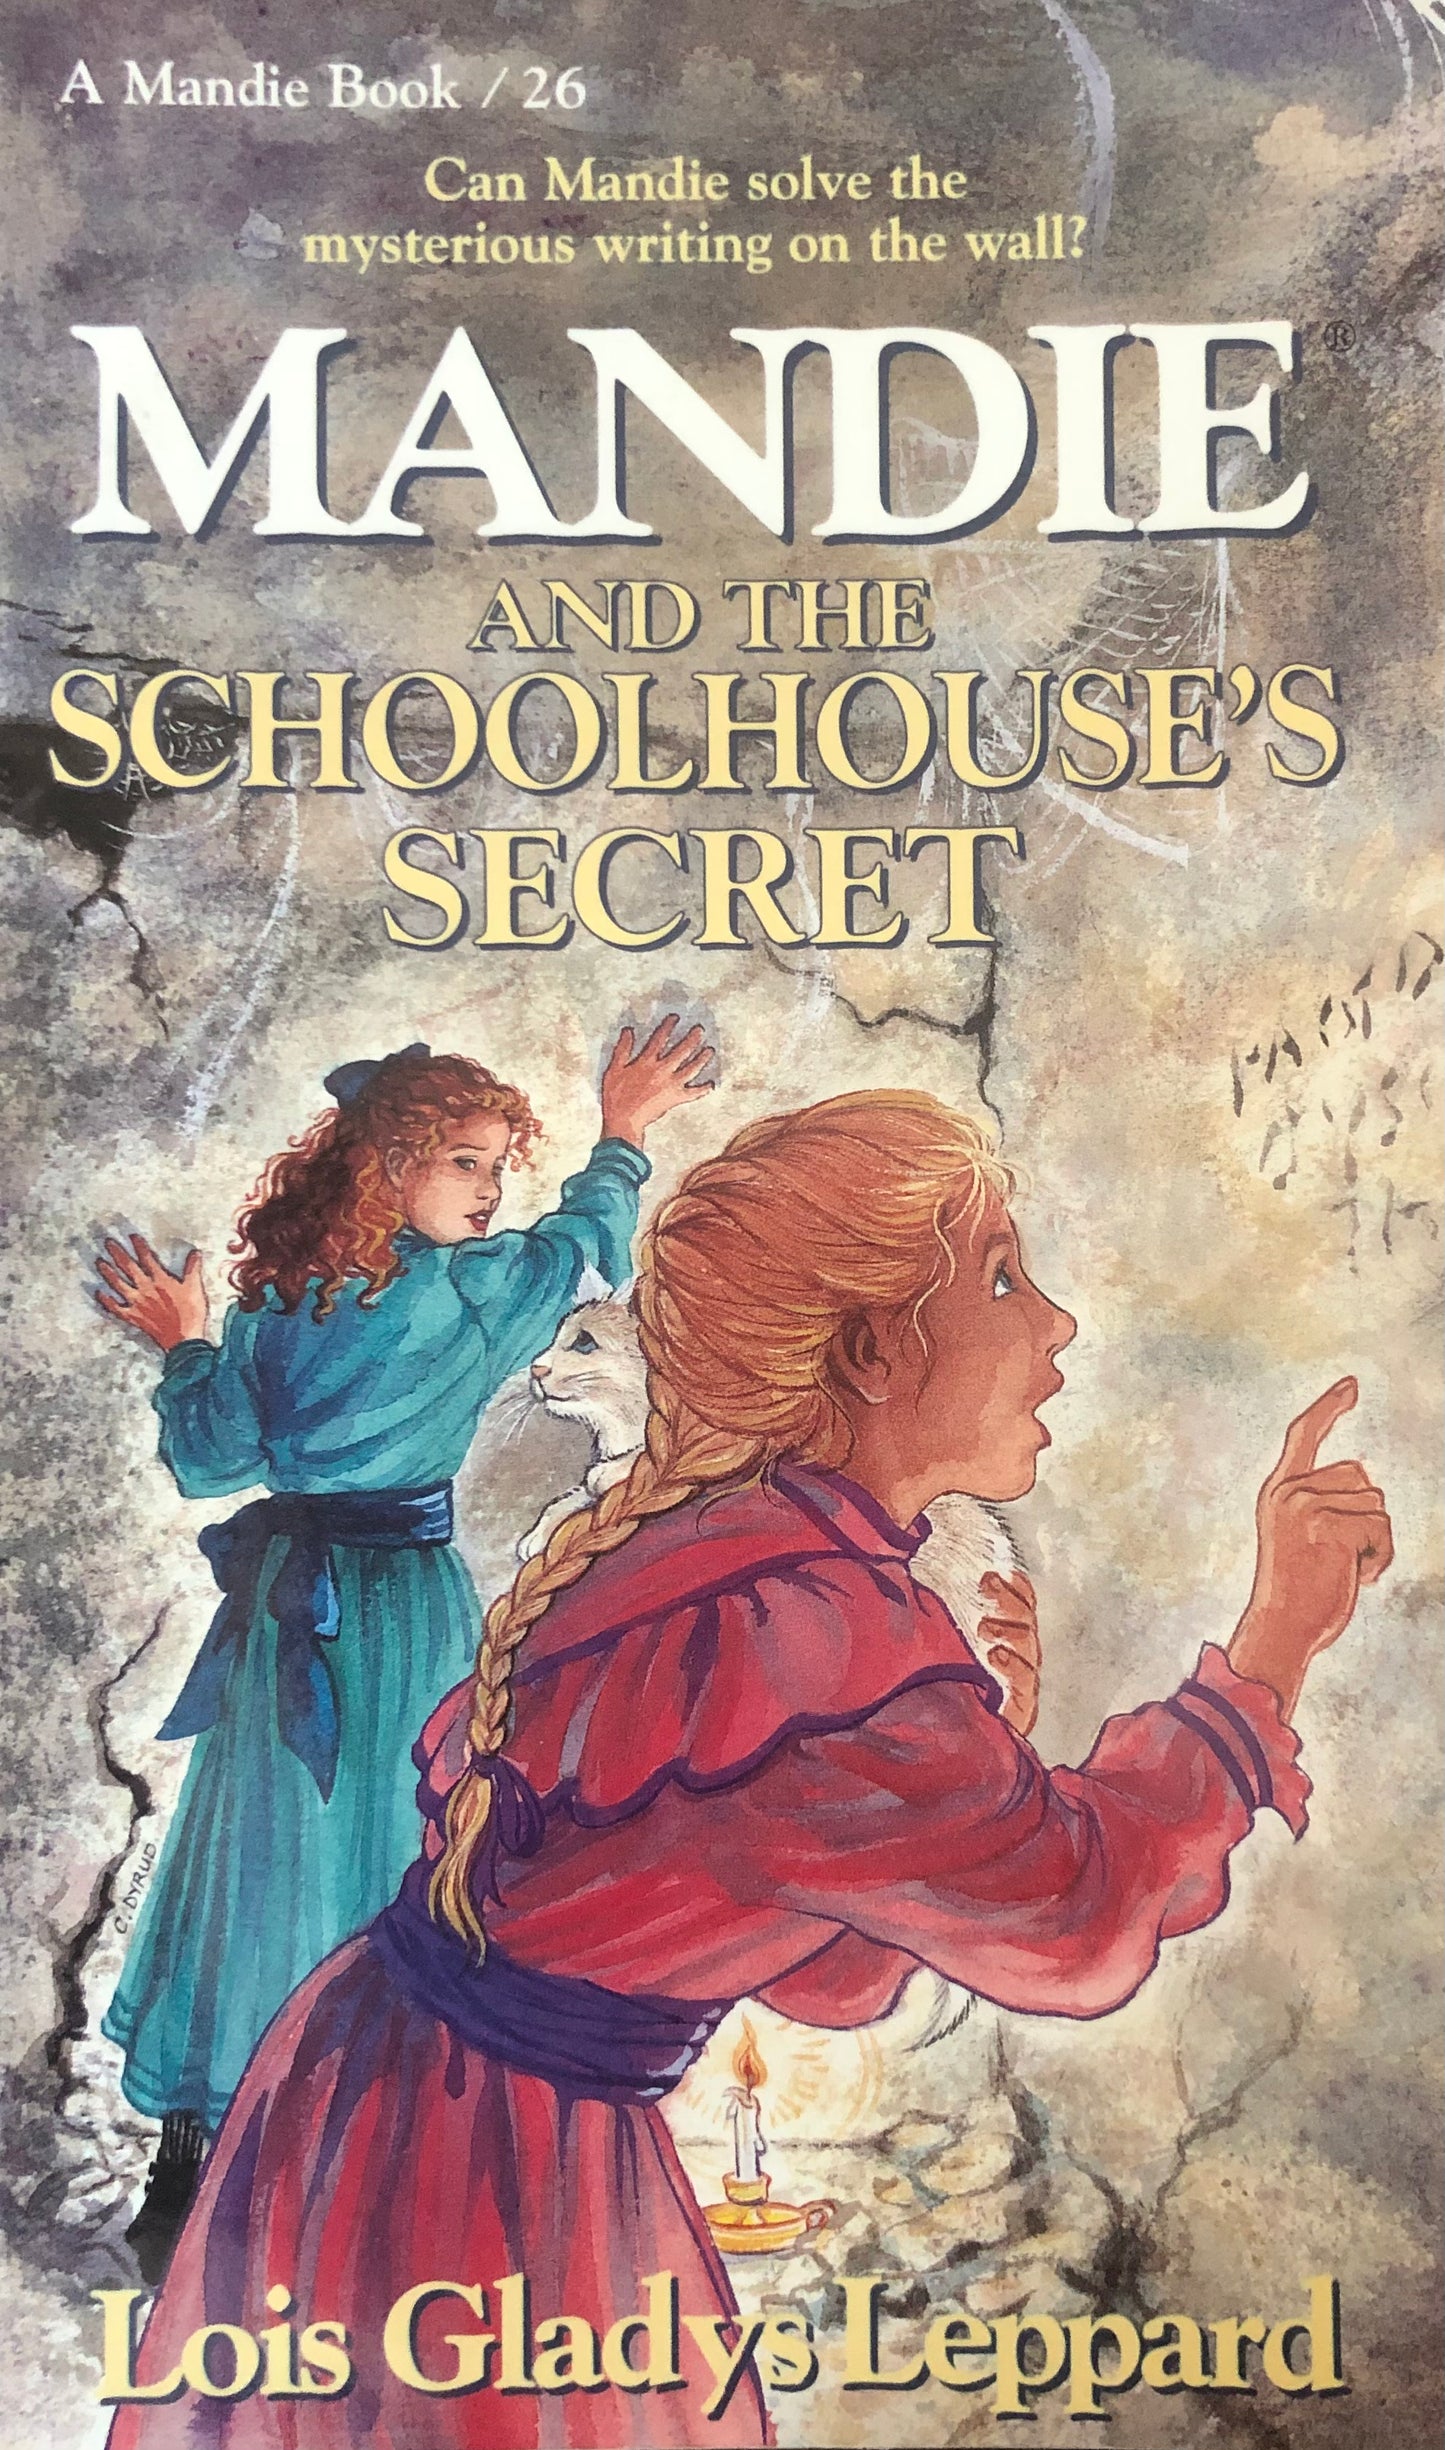 Book #26 Mandie and the Schoolhouse's secret by Lois Gladys Leppard